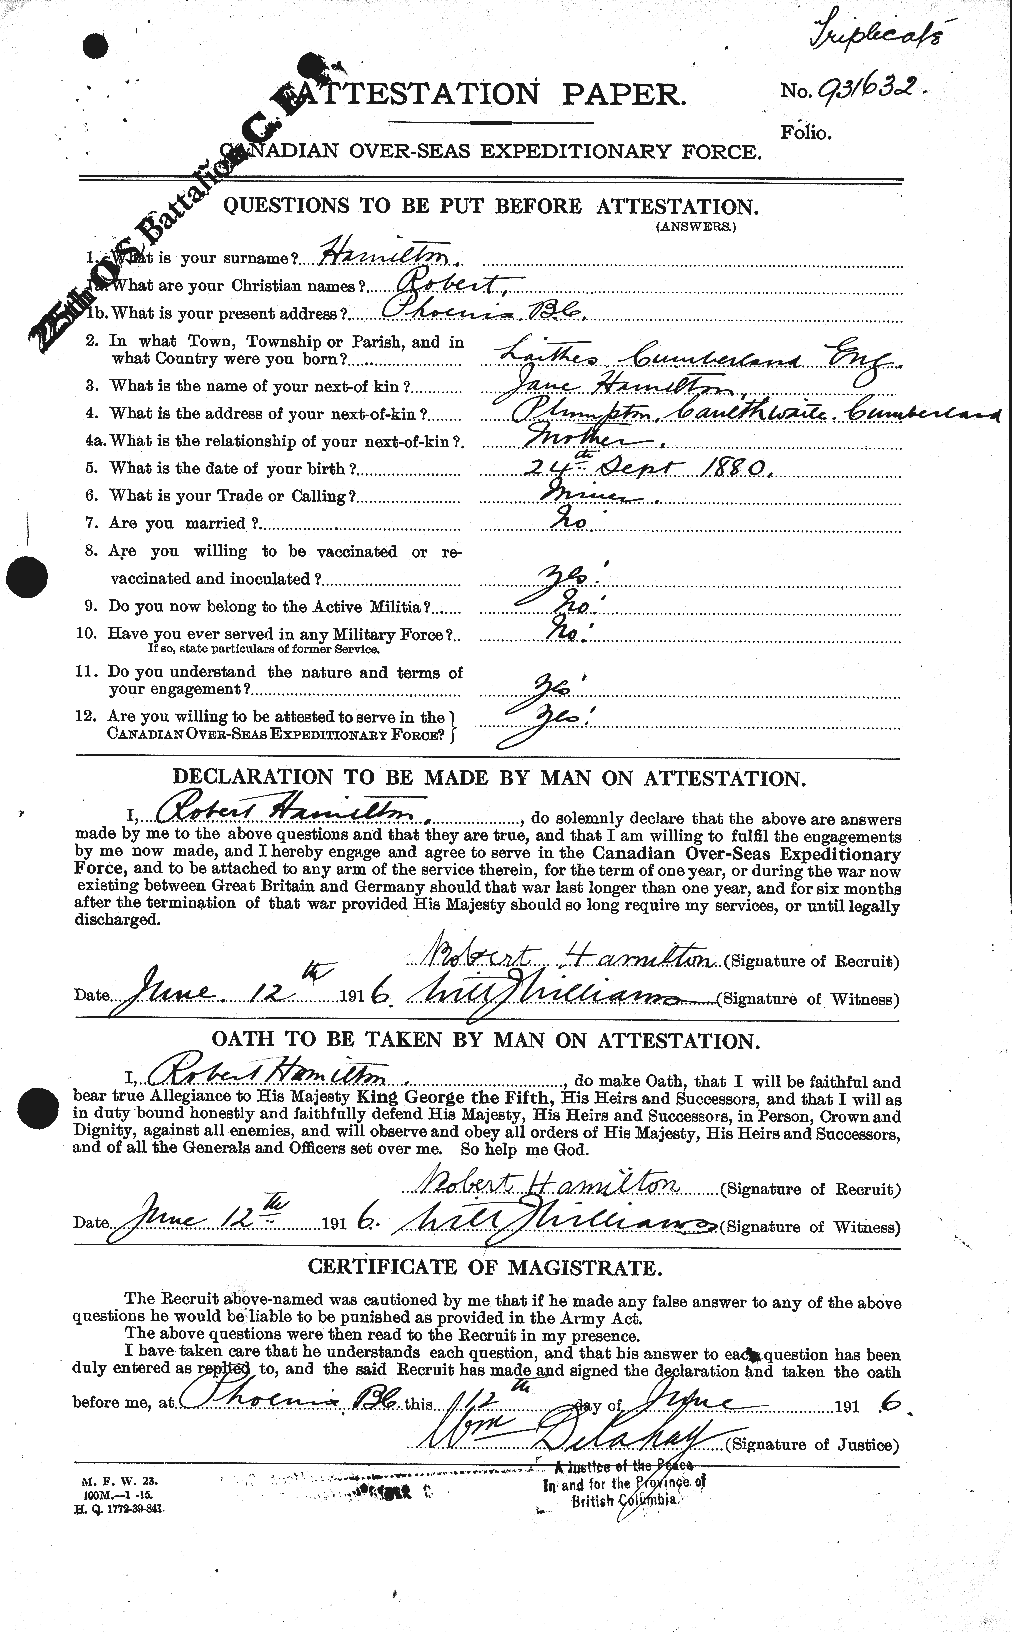 Personnel Records of the First World War - CEF 373244a